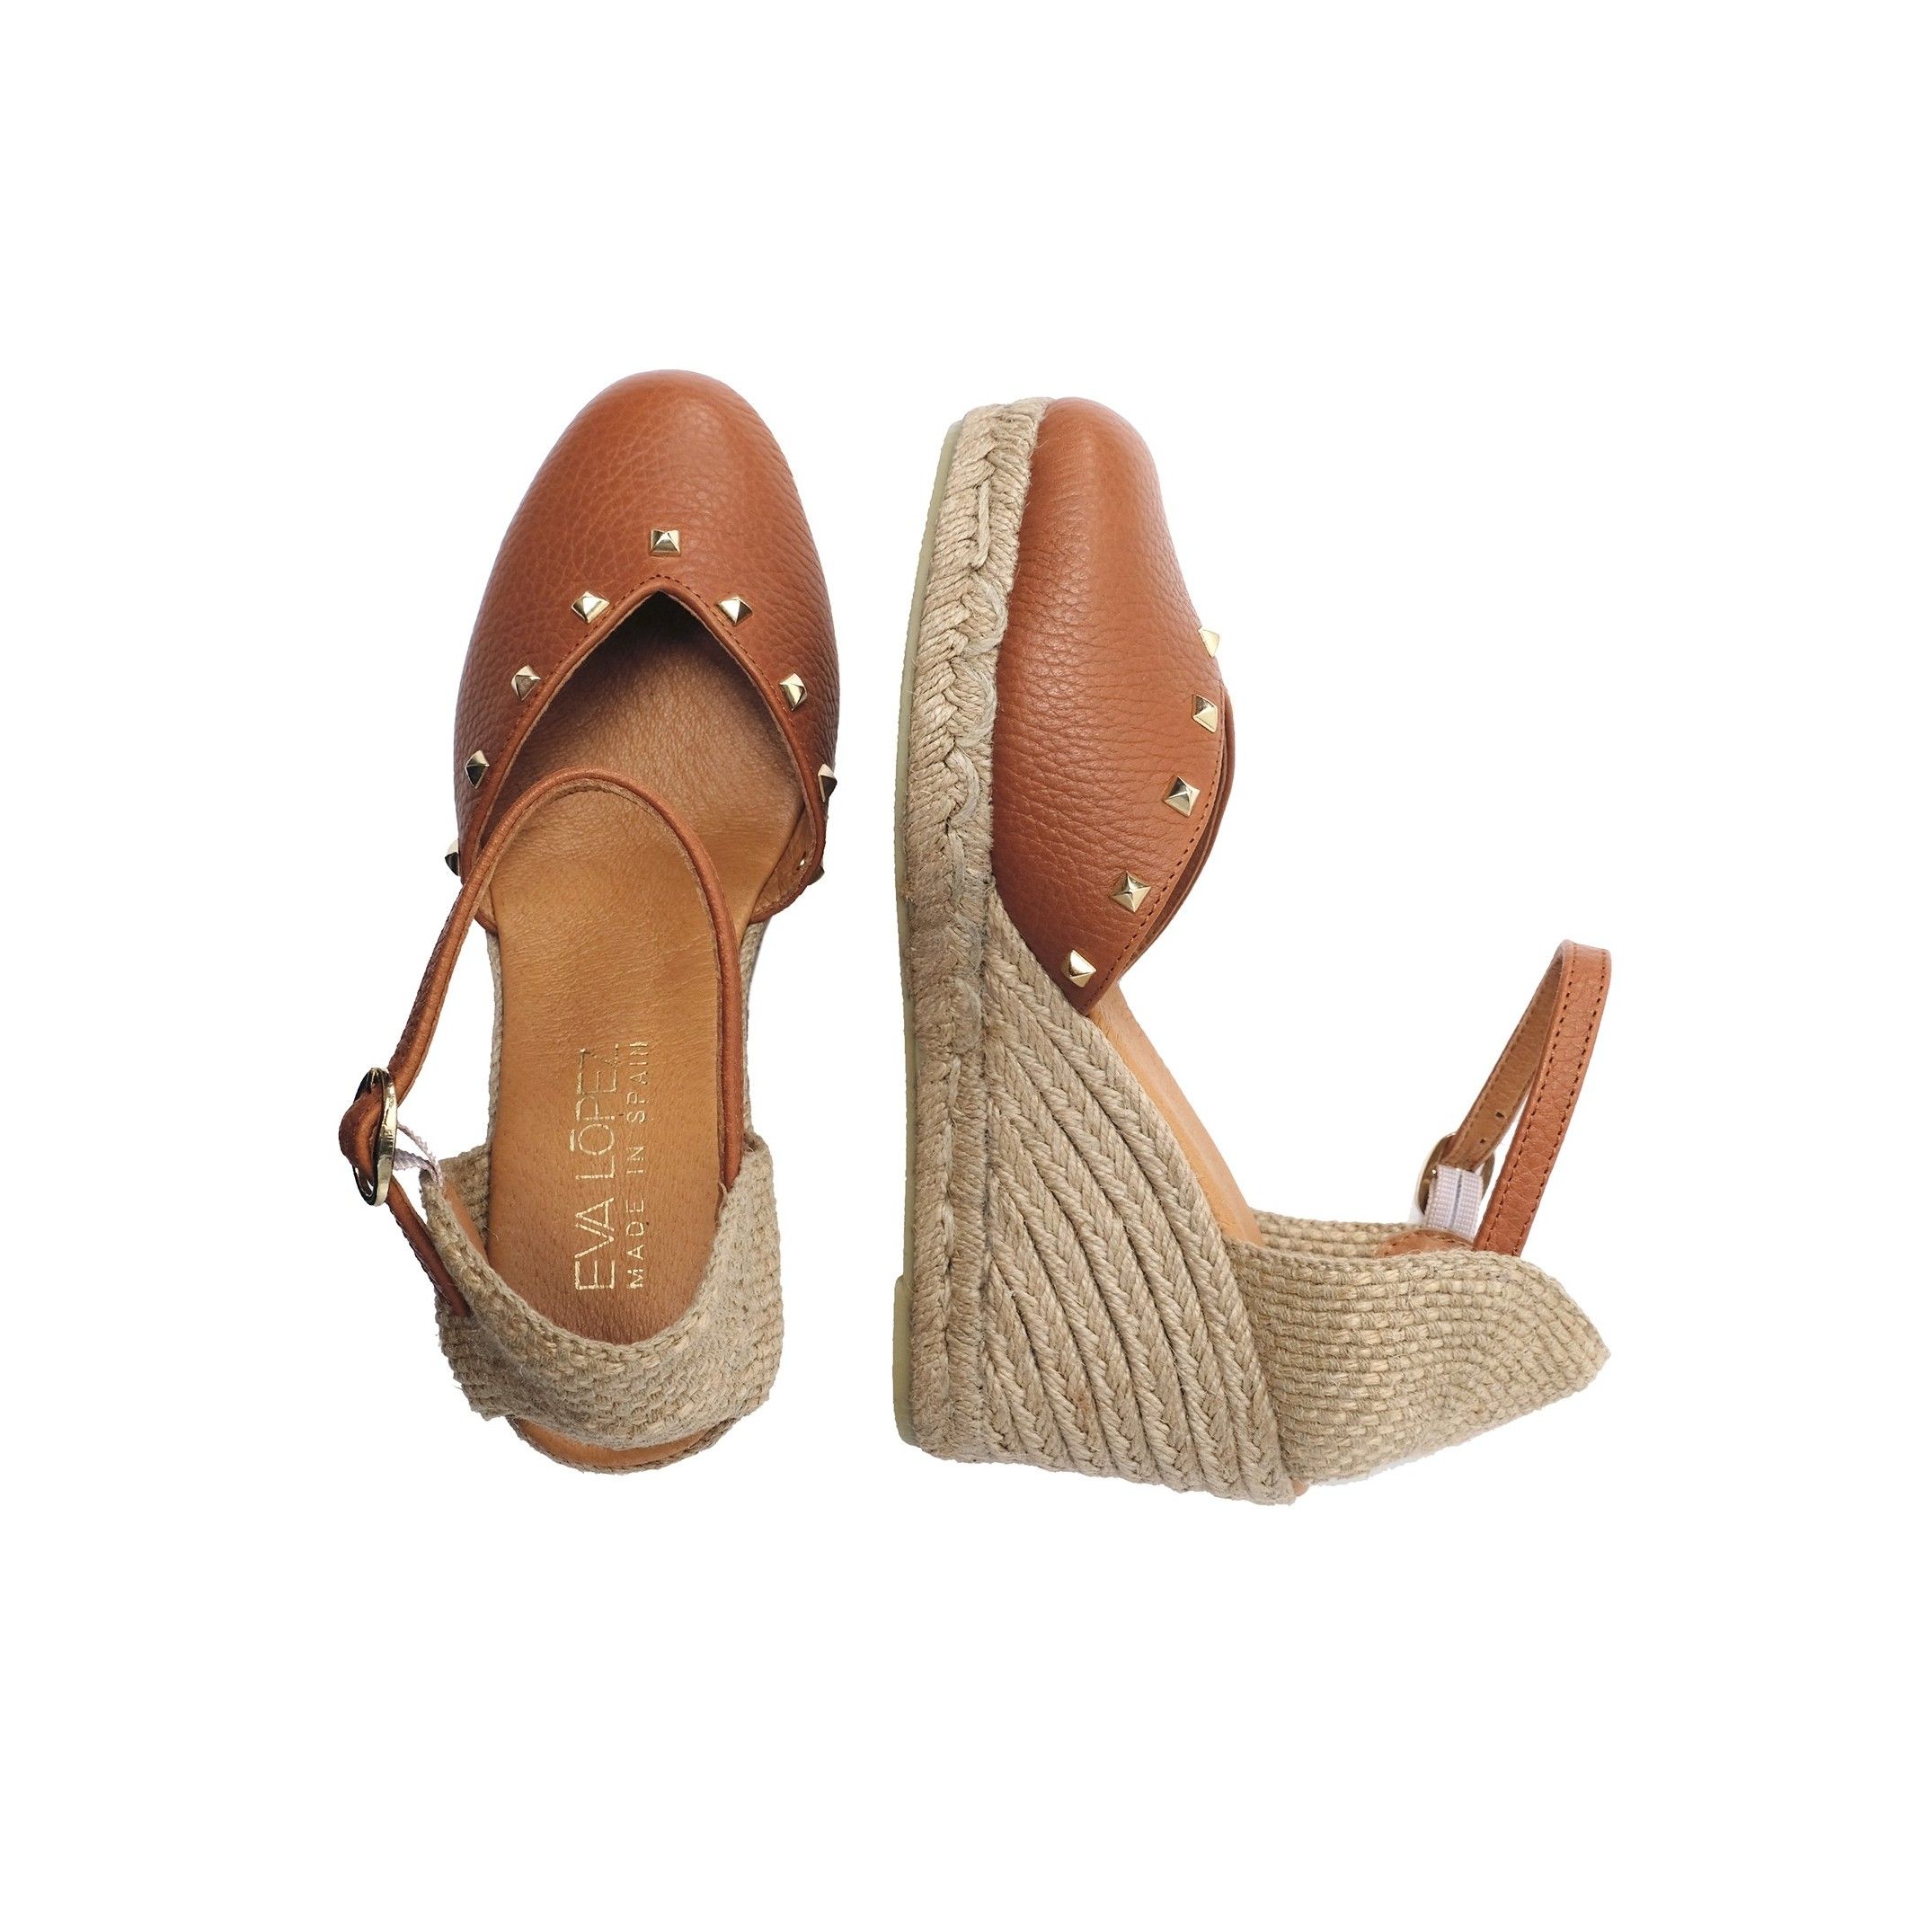 Ankle strap wedge sandals for women. By Eva Lopez Shoes. Upper made of cowhide leather. Metal buckle closure. Inner lining and insole: pig lining. Padded shoe sole: 0.3 cm. Sole material: synthetic. Heel height: 8 cm. Platform: 2 cm Designed and manufactured in Spain.